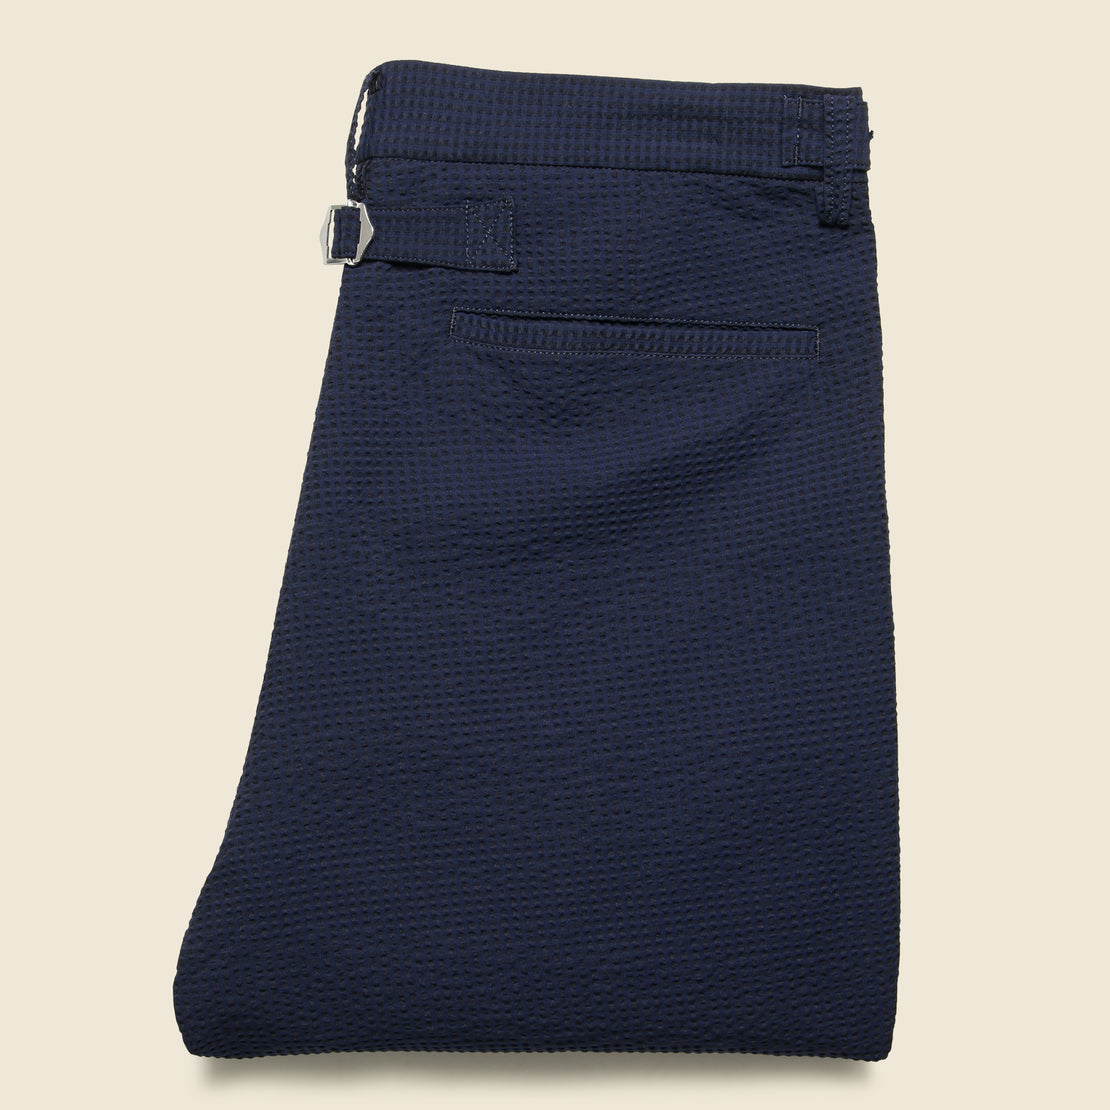 IVY Ankle-Cut Seersucker Trousers - Navy - BEAMS+ - STAG Provisions - Suiting - Suit Pant